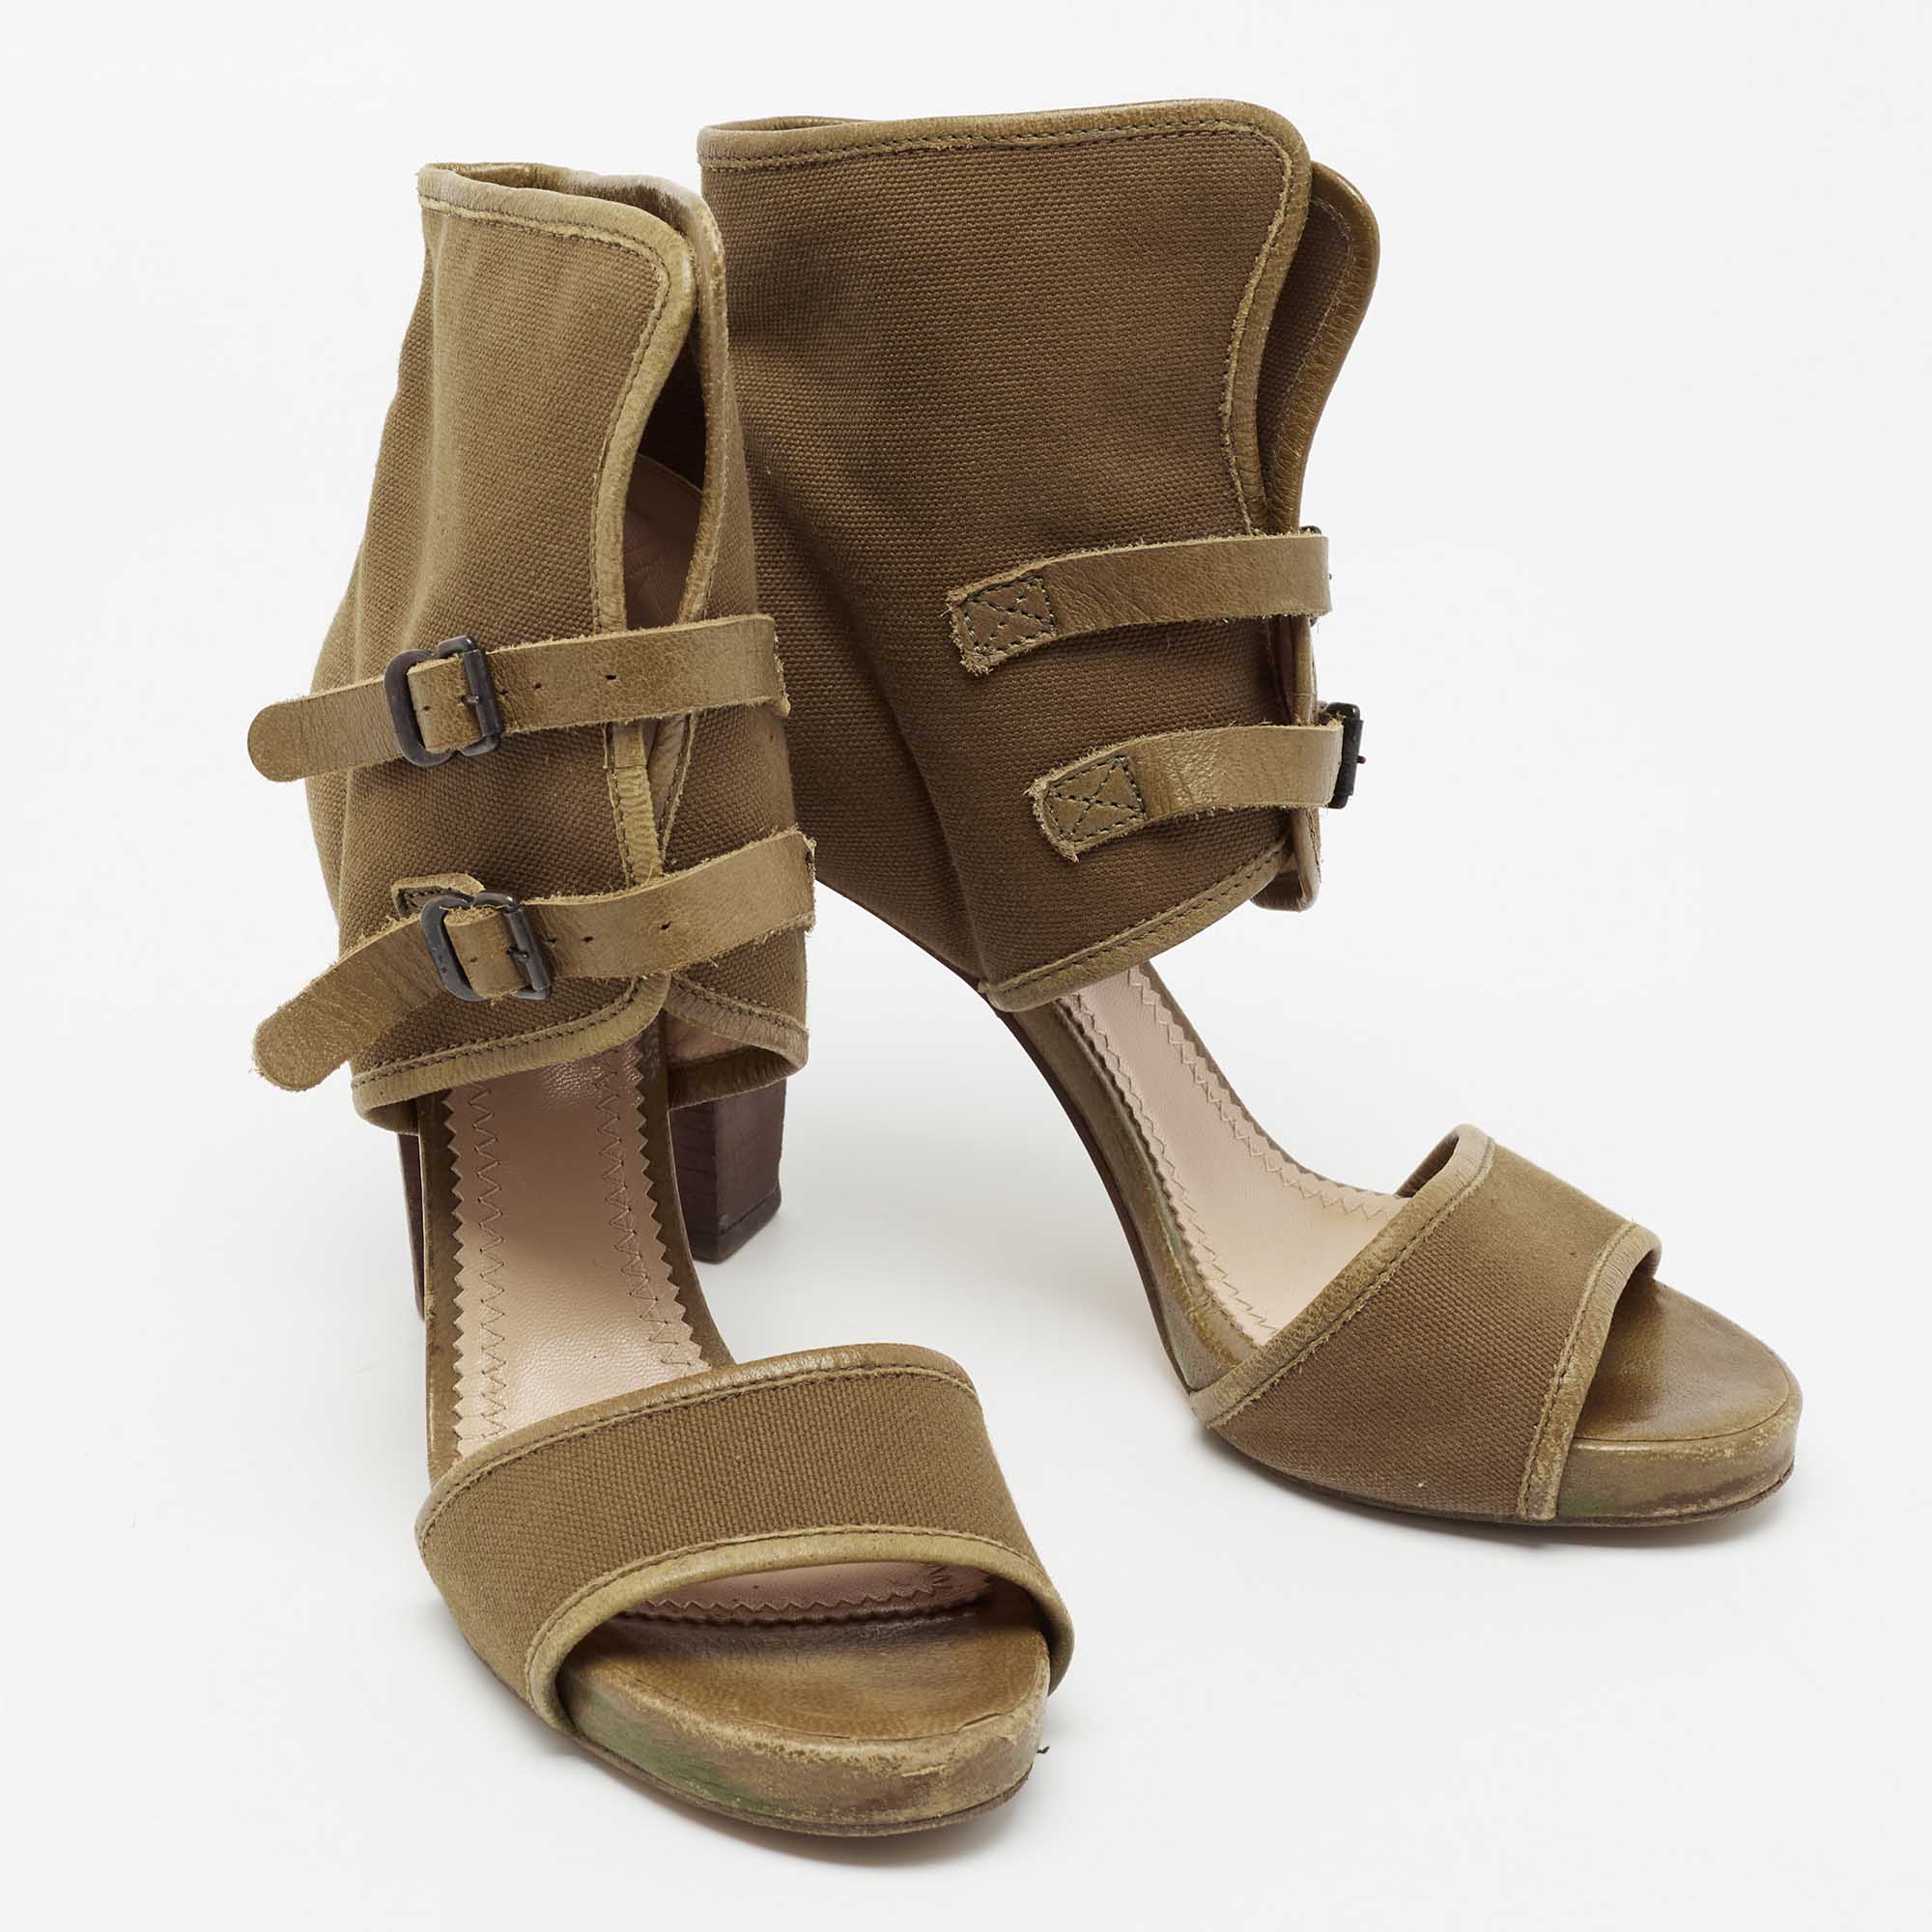 Chloe Brown Canvas And Leather Trim Ankle Sandals Size 38